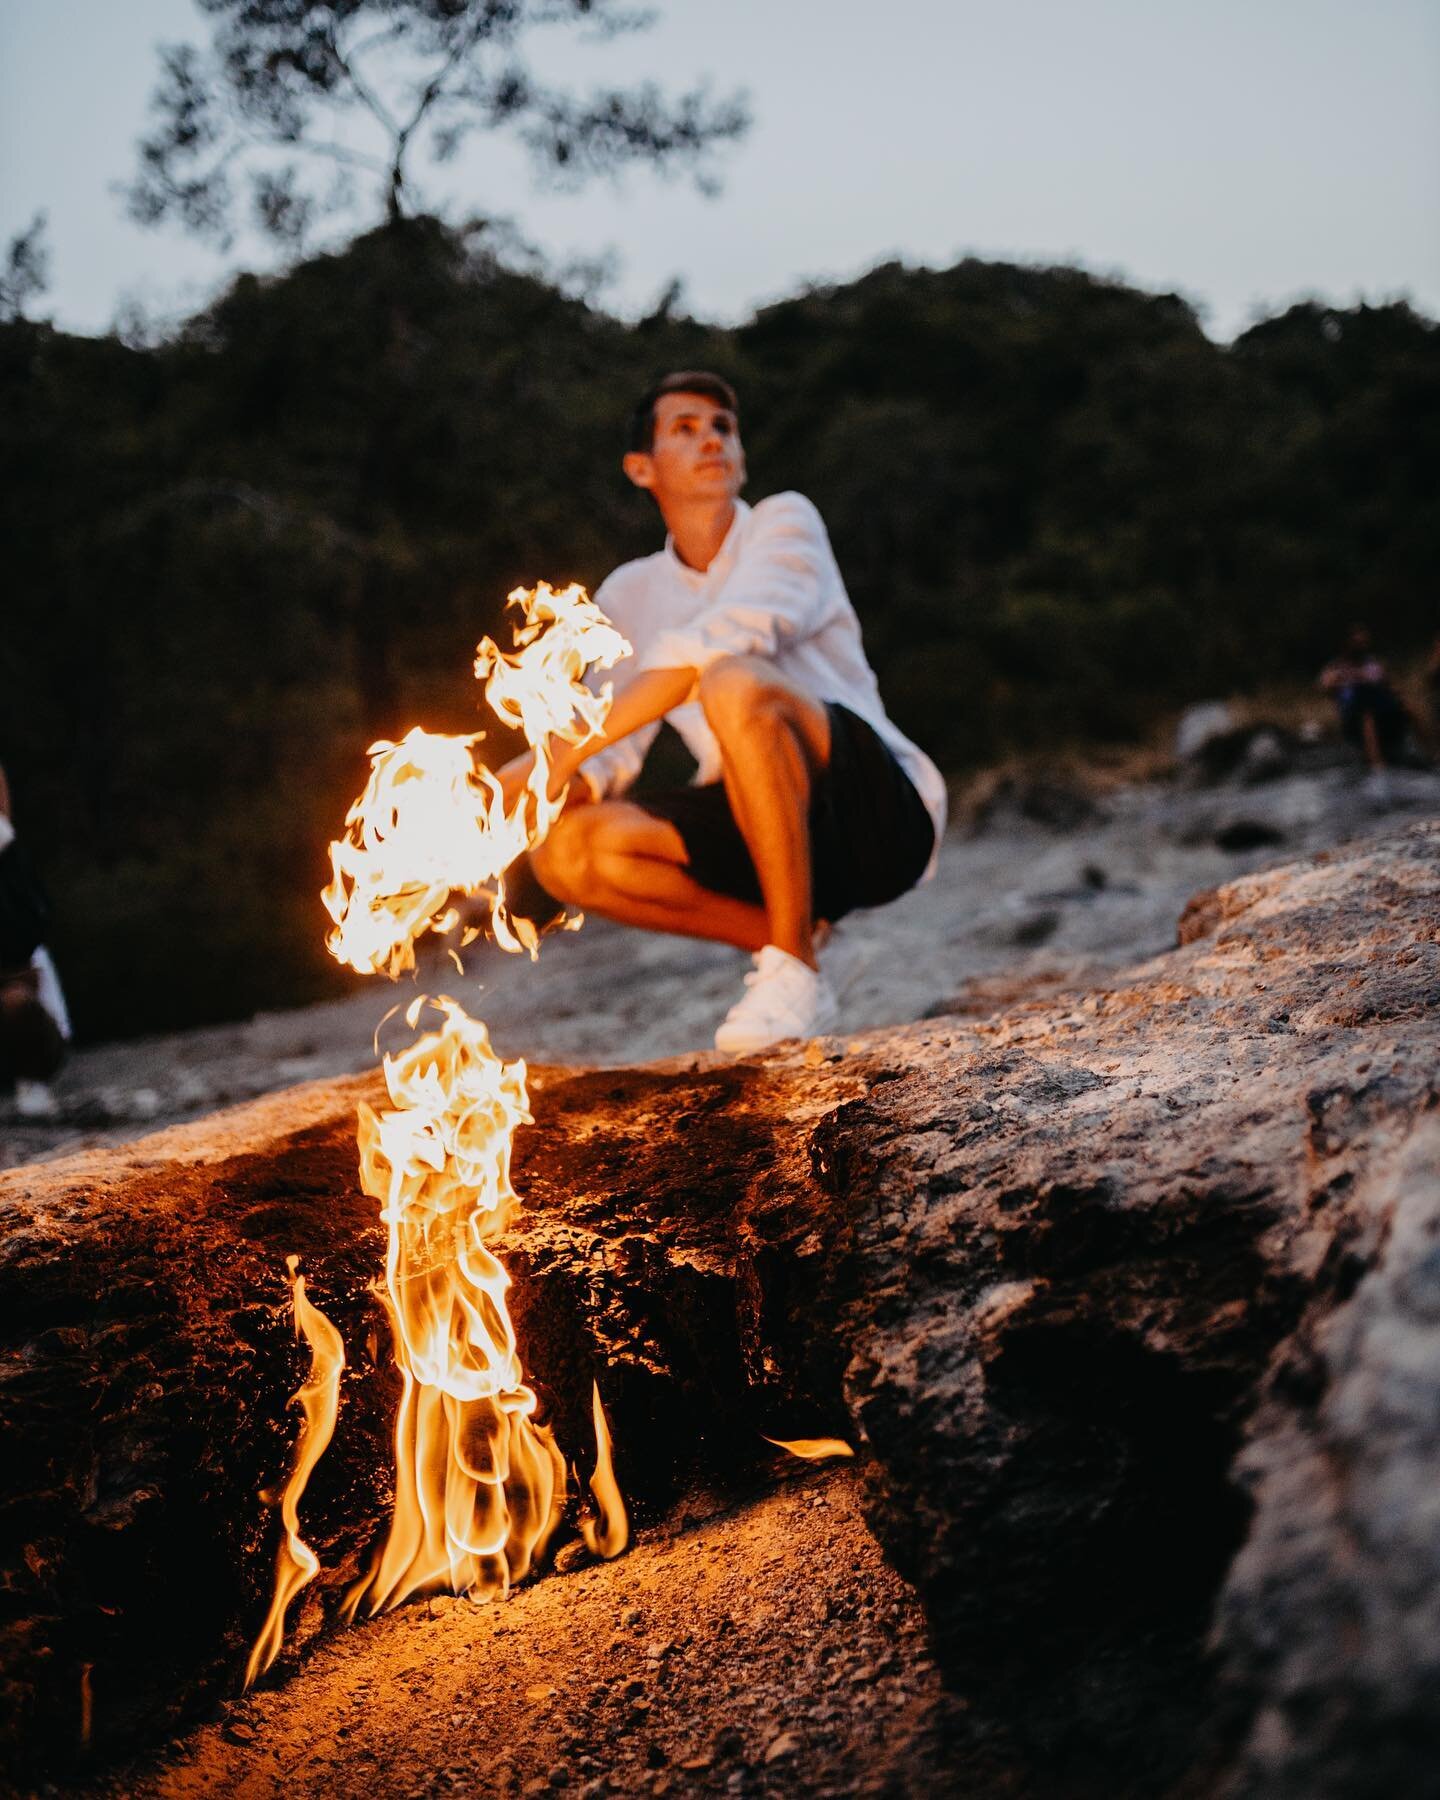 The flames you see on these photos have been burning for centuries. Mount Chimaera a place in ancient Lucia notable for constantly burning fires.
These are methane gases that emerge from rock and burn.
.
However, a legend says that indestructible 3 h